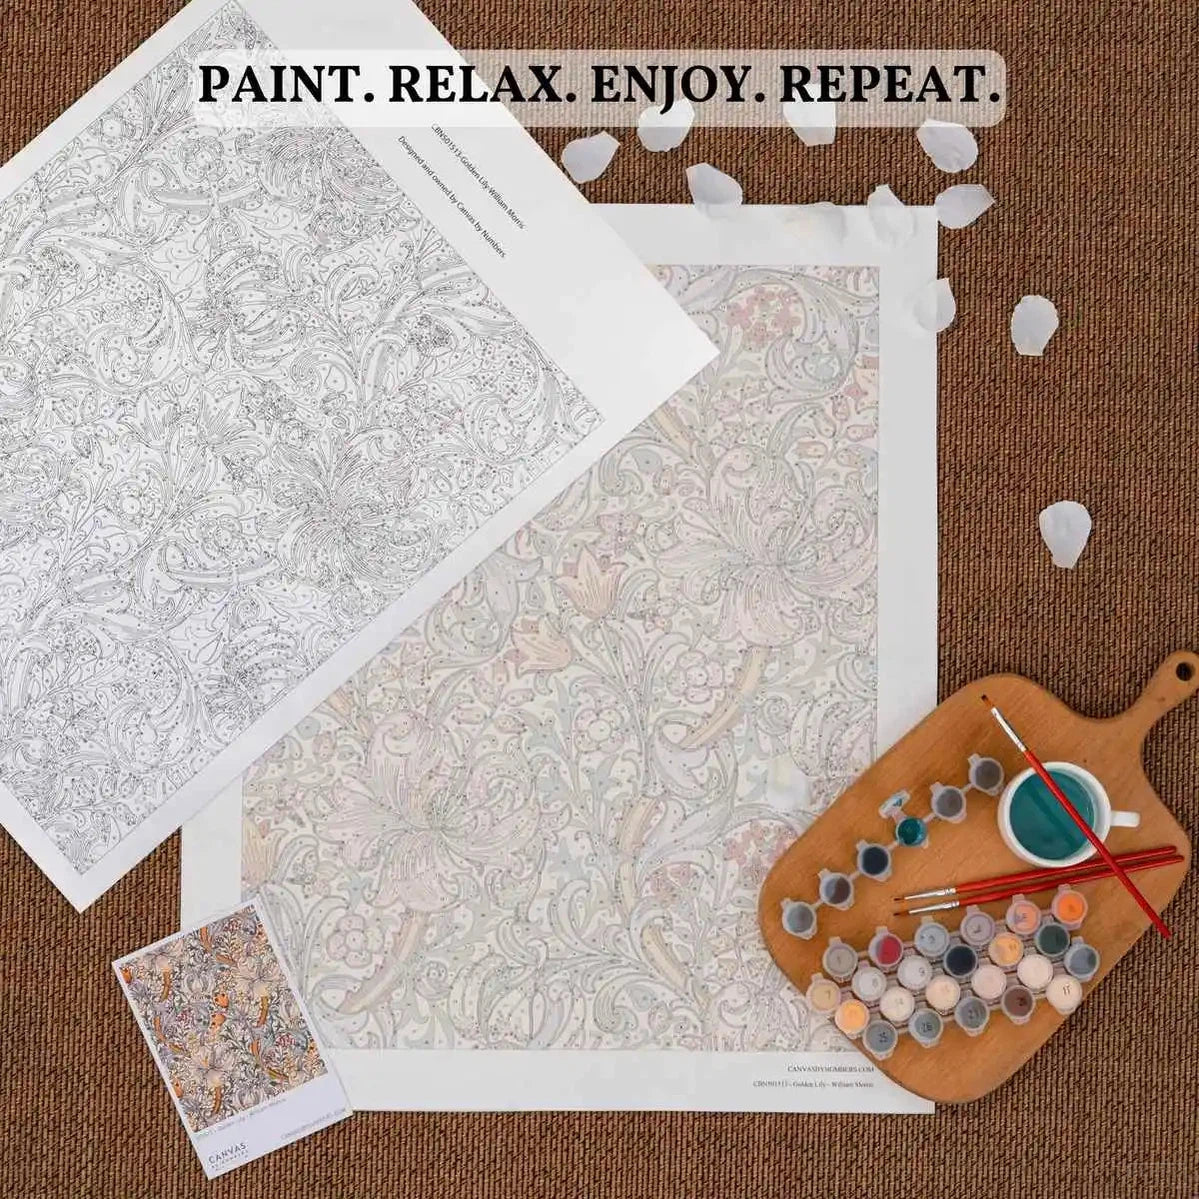 Sierra Nevada - Paint by Numbers-Sierra Nevada - Darío de Regoyos paint by numbers kit is one of our best seller paintings at Canvas by Numbers. Free shipping and 60 days money-back.-Canvas by Numbers